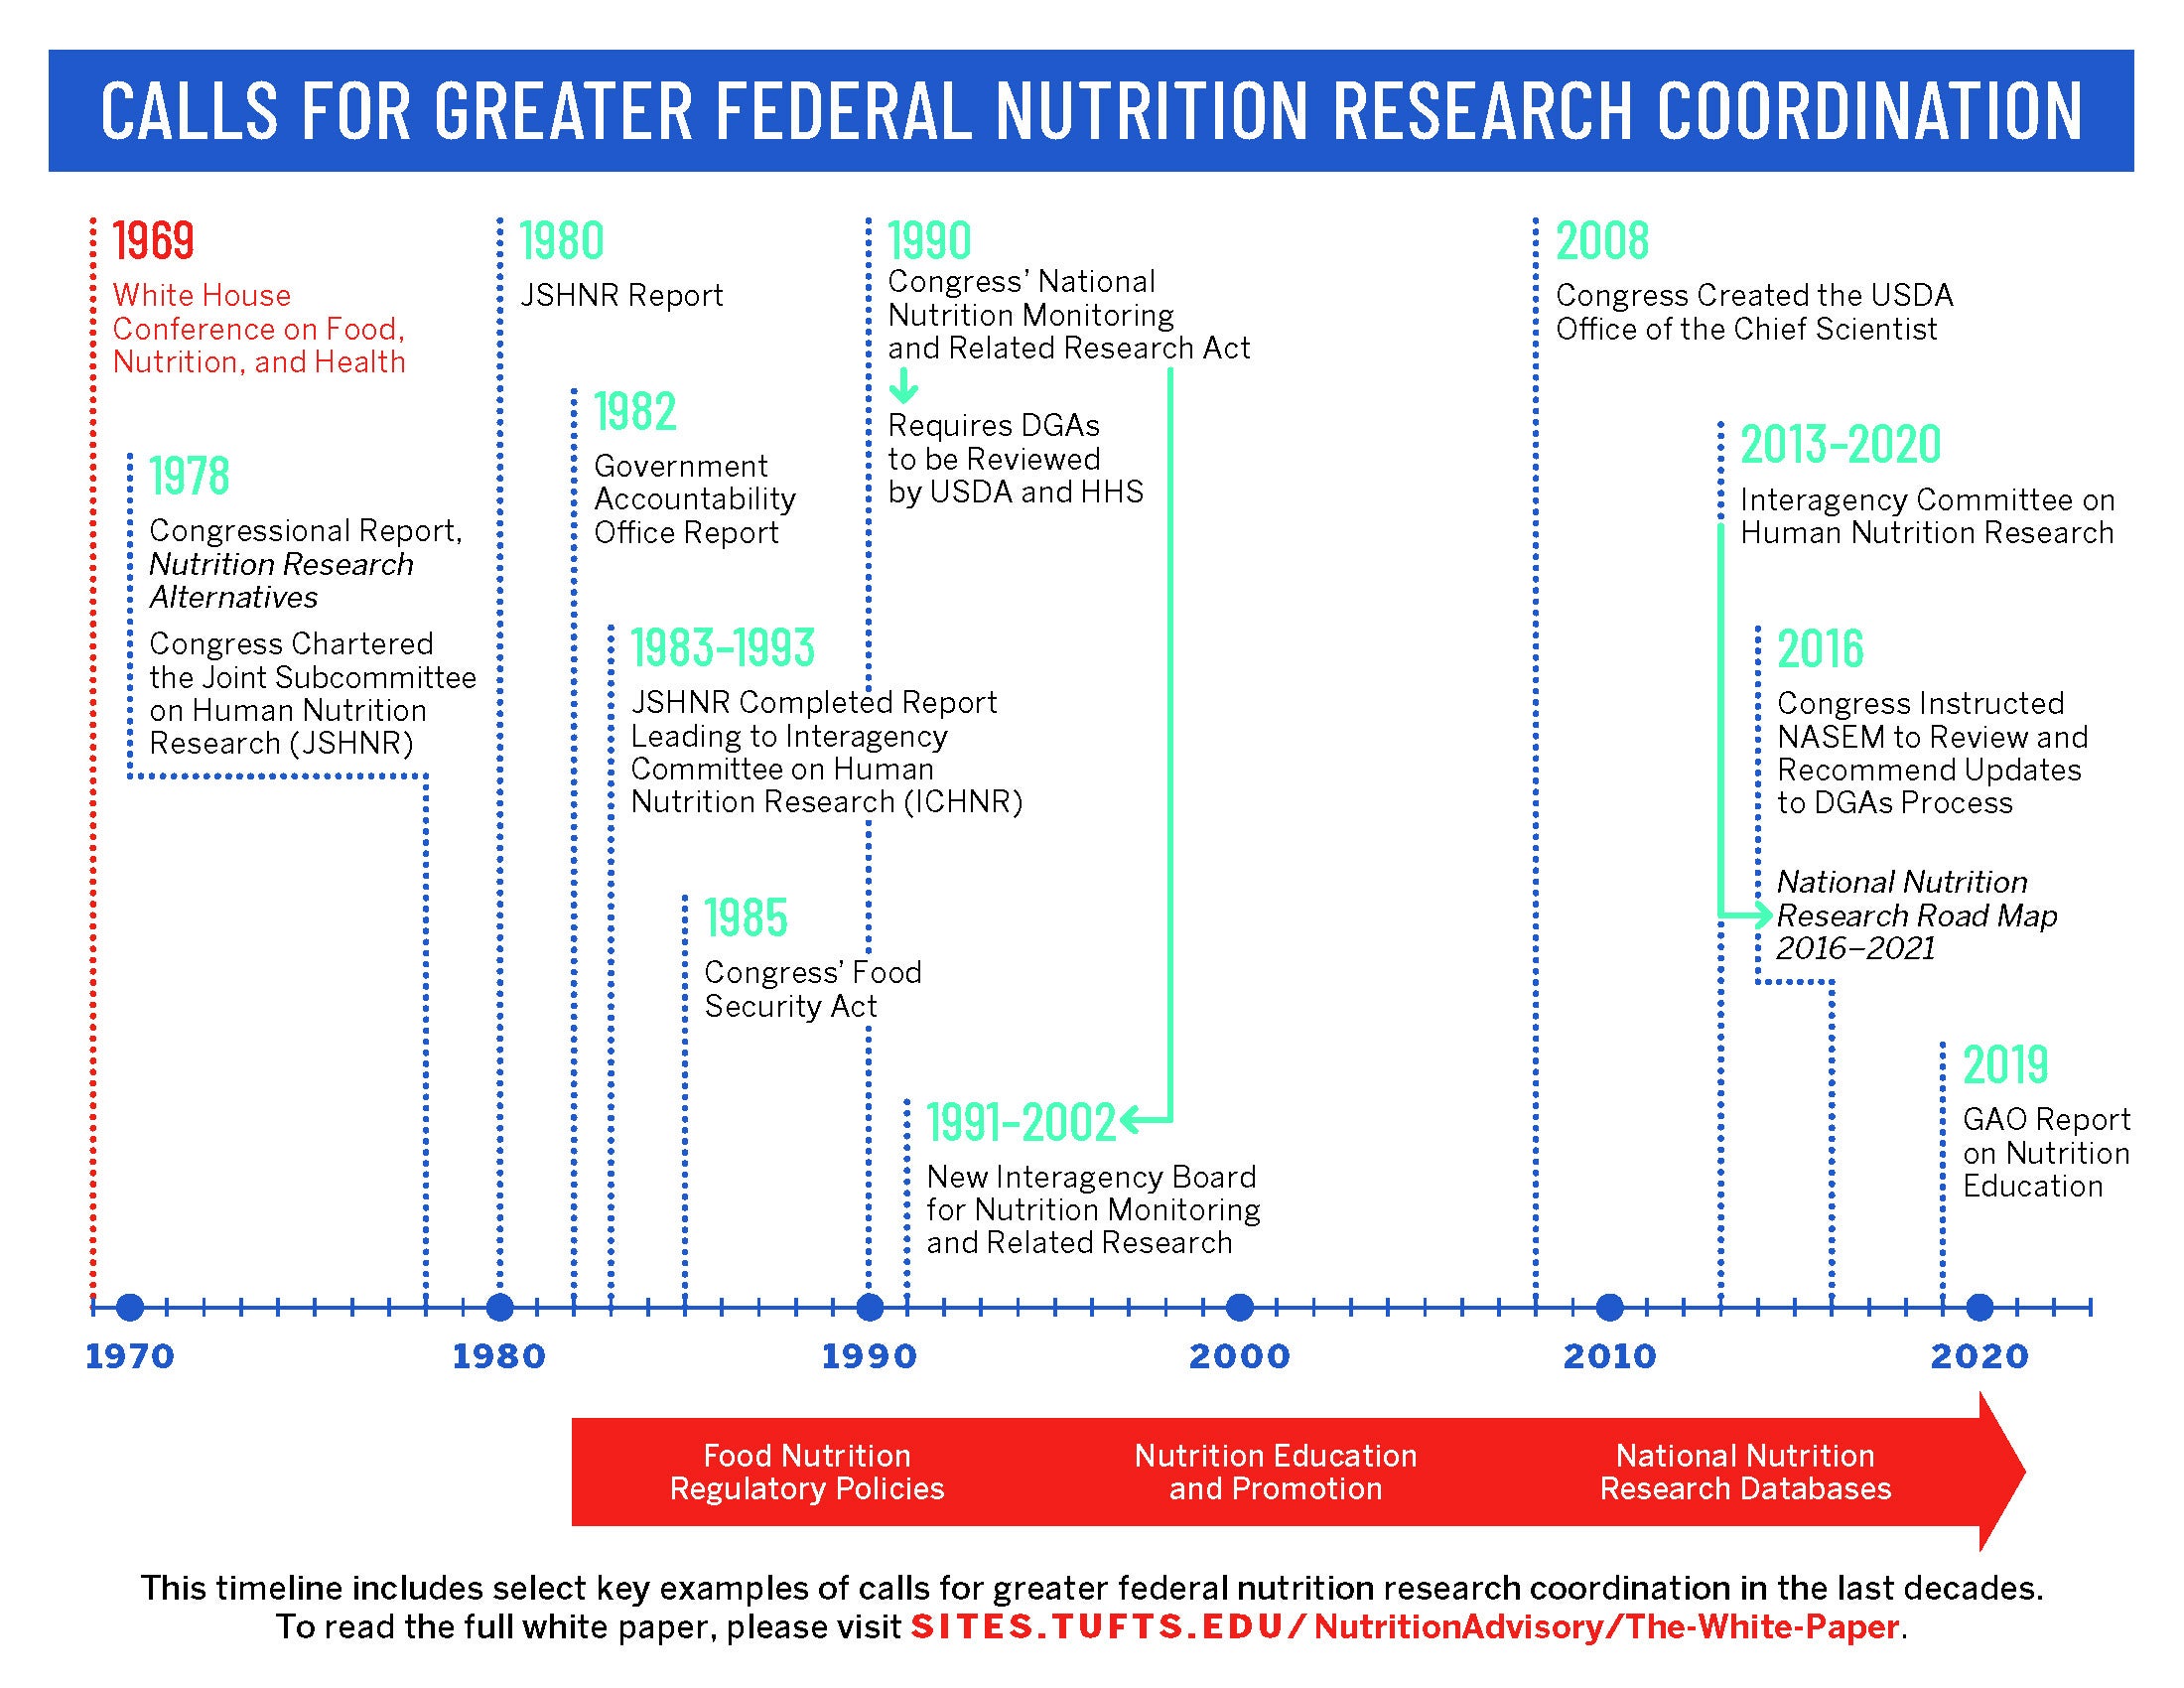 An infographic showing the timeline of calls to invest in national nutrition